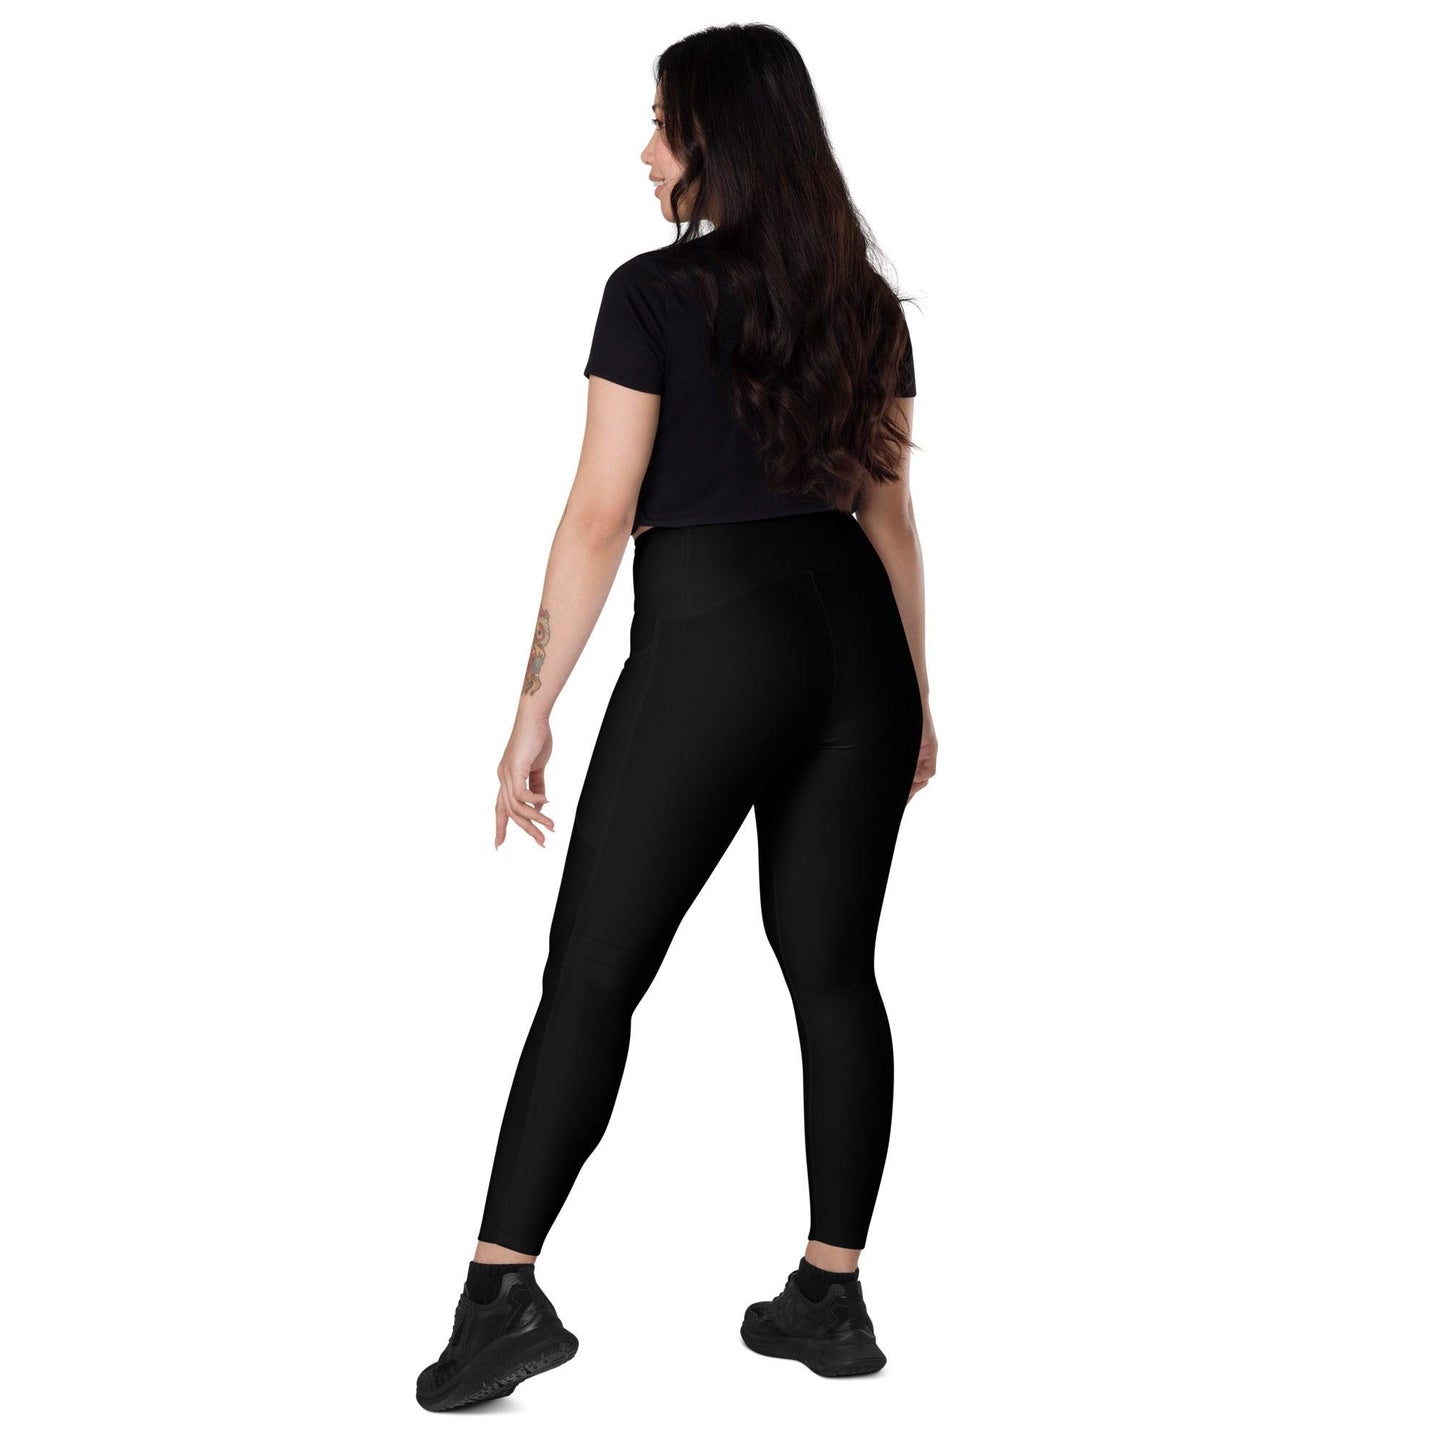 iSAW Womens Black Leggings with Pockets - iSAW Company